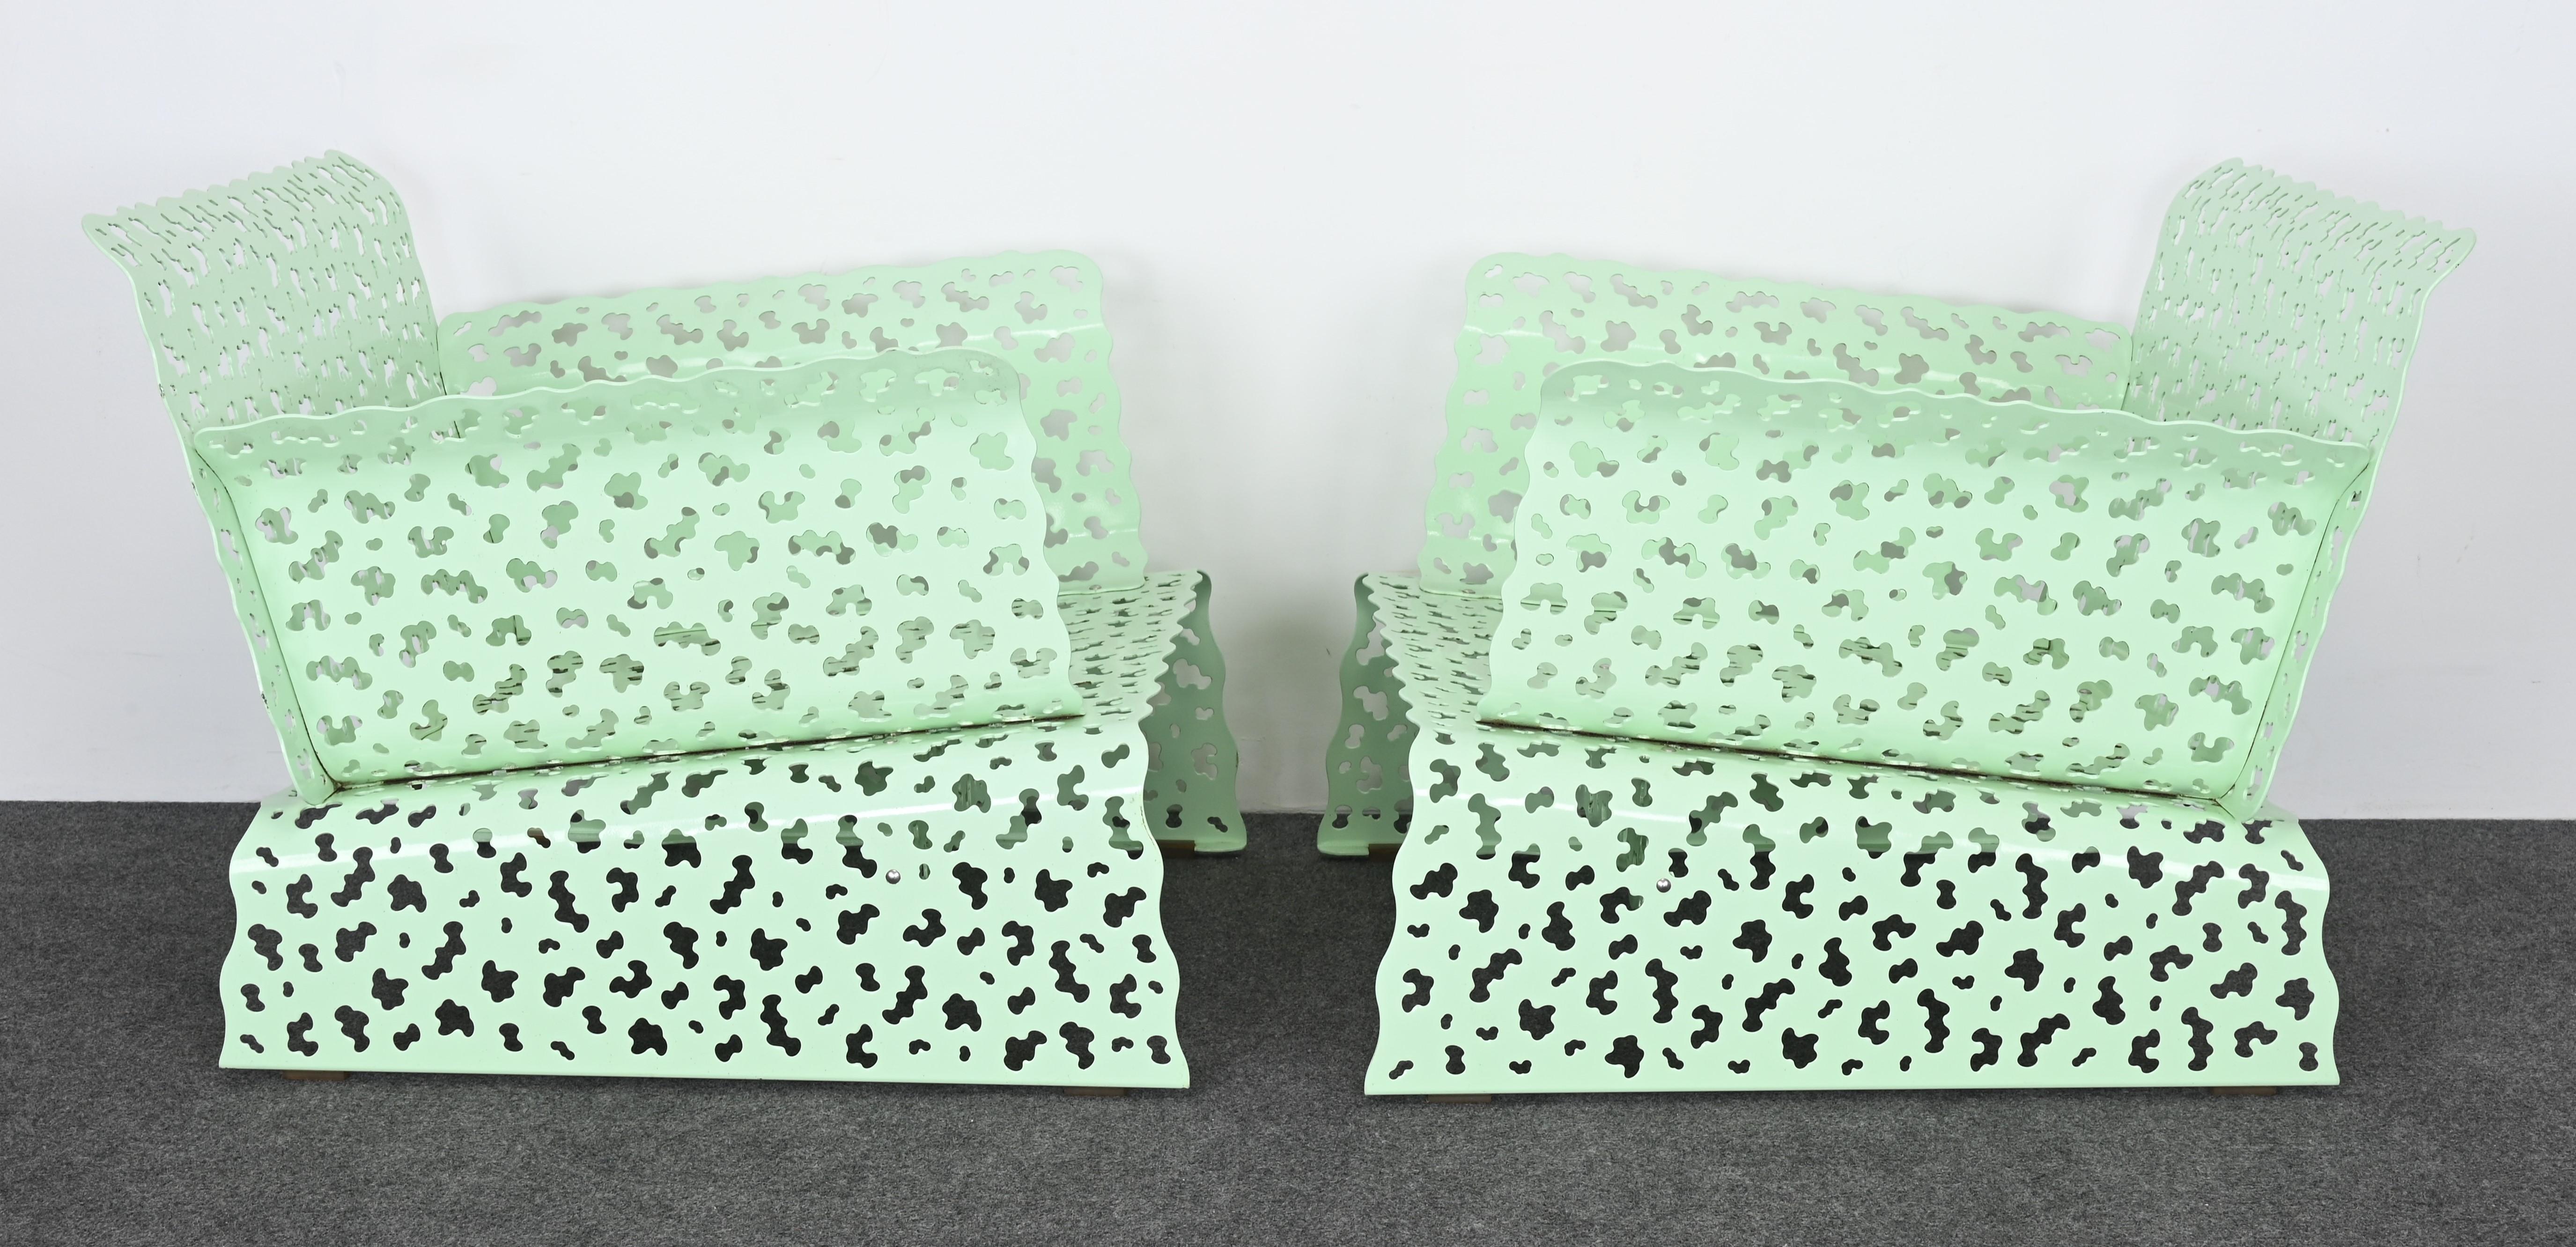 Aluminum Knoll Limited Edition 'Topiary Cushion Lounge Chairs' and Side Table, 1997 For Sale